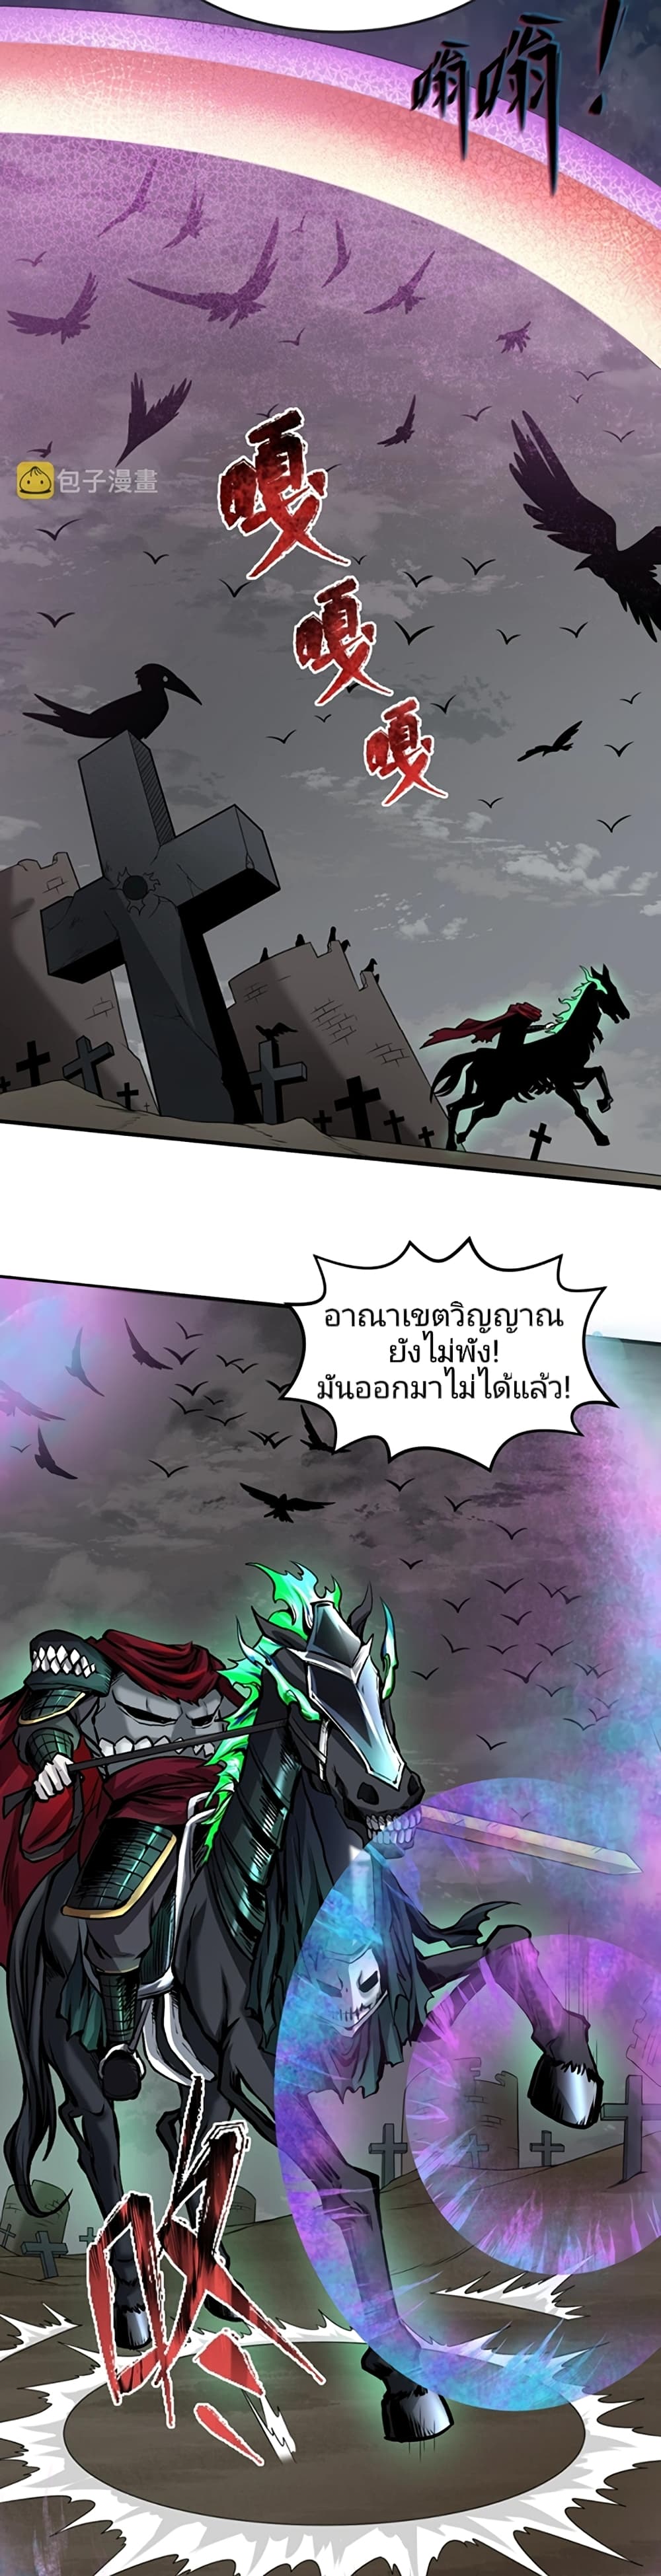 The Age of Ghost Spirits à¸à¸­à¸à¸à¸µà¹ 22 (9)